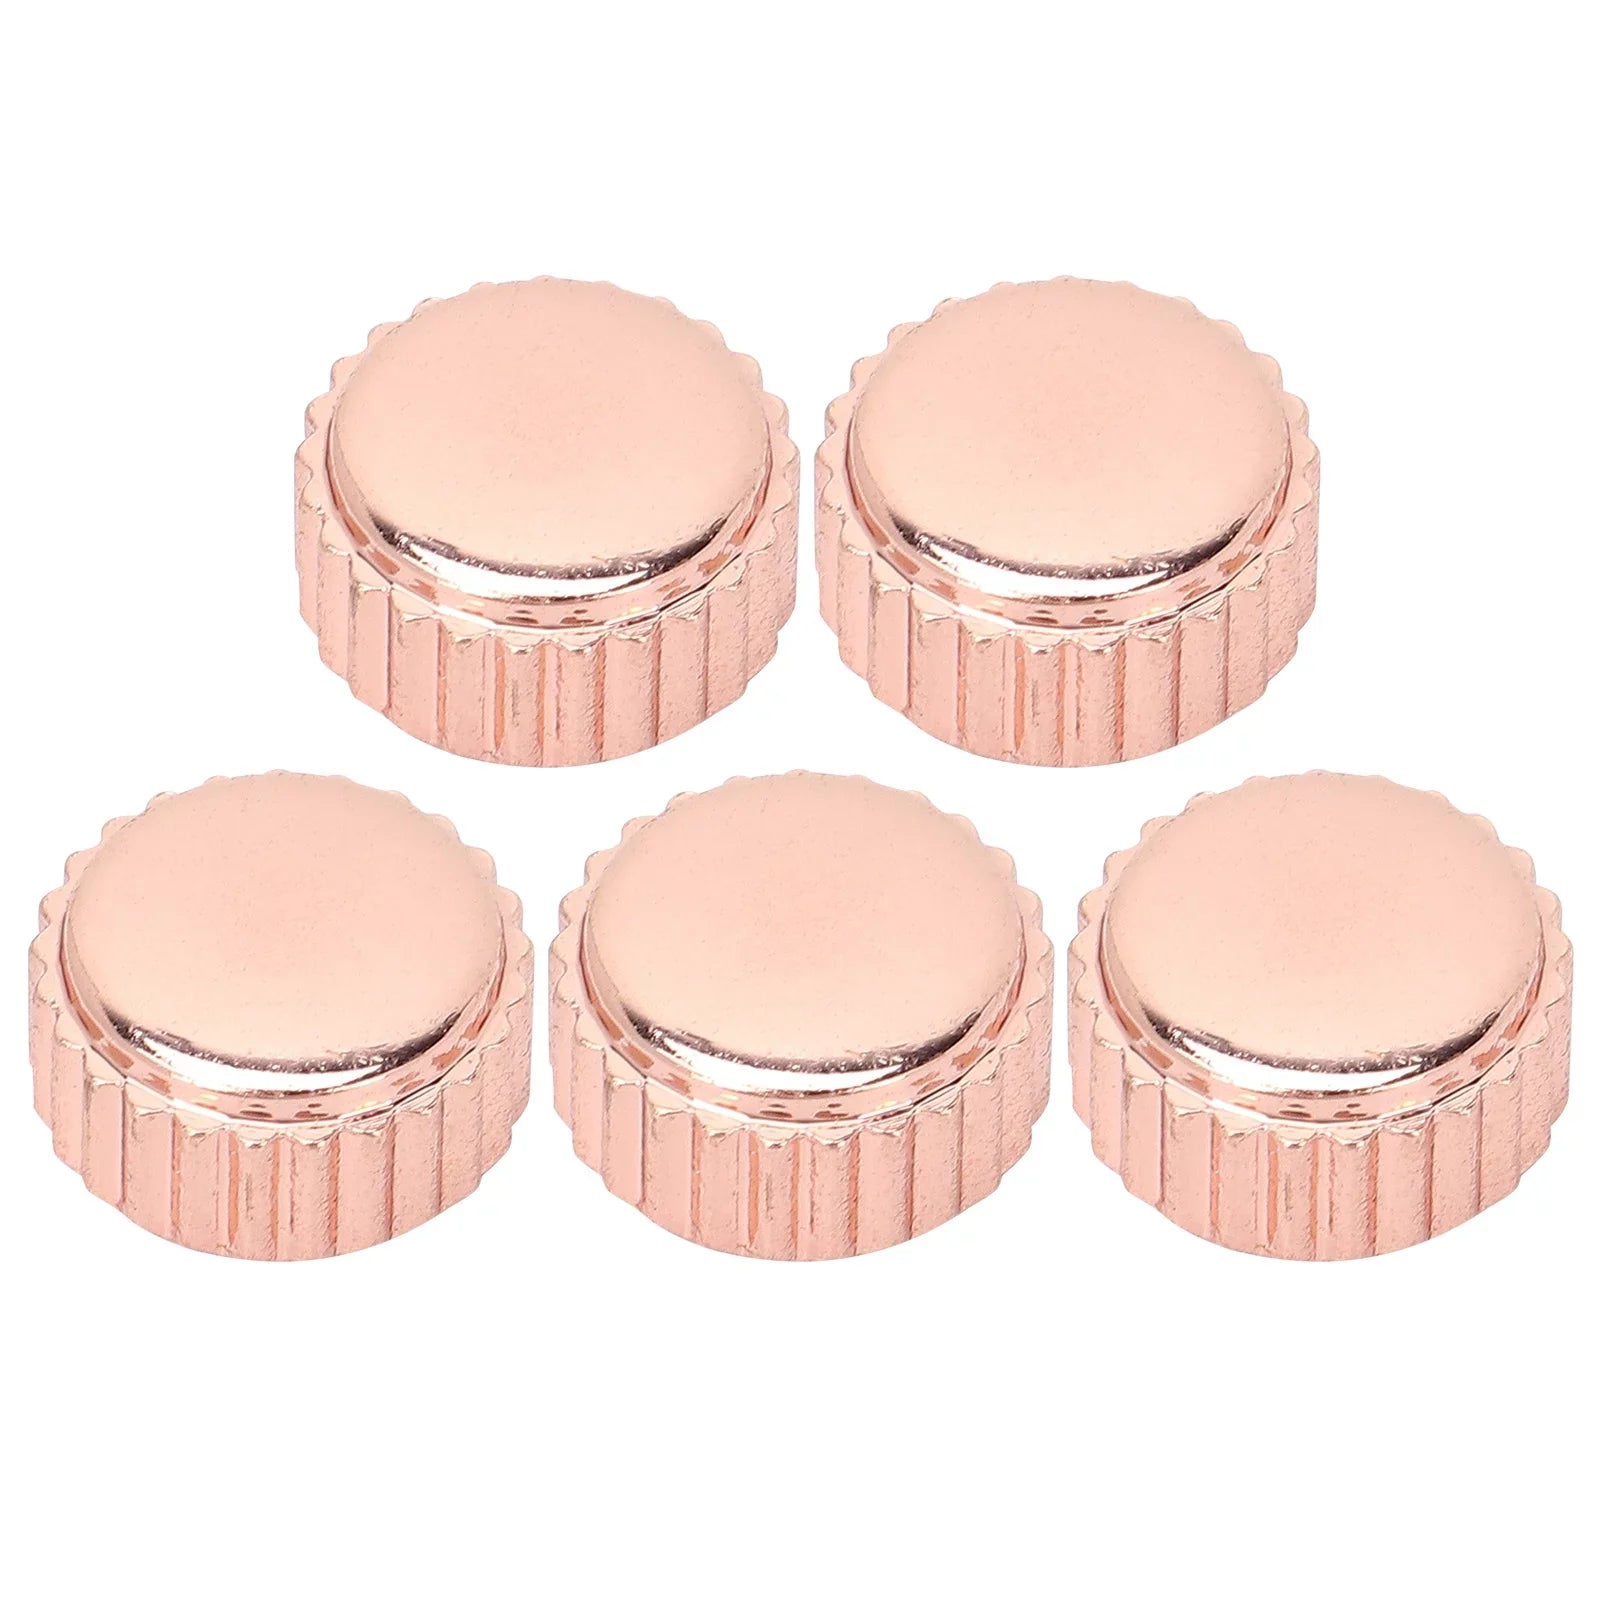 Micron Gold Waterproof Crowns in White, Rose and Yellow Gold (3.0mm - 6.5mm)